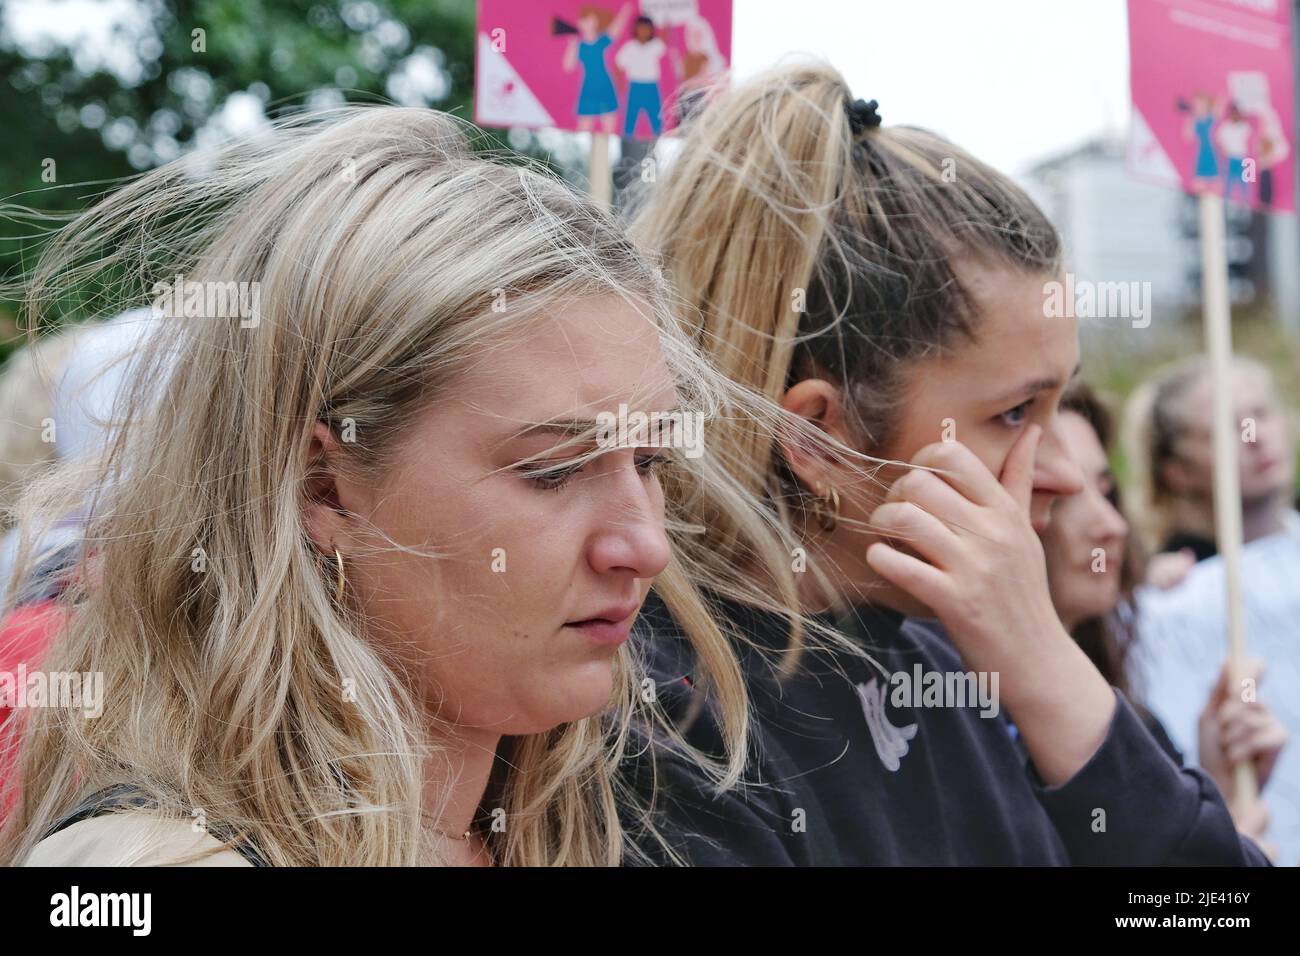 London, UK, 24th June, 2022. A woman sheds a tear as around 100-150 campaigners and supporters gathered to protest outside the American embassy in Vauxhall following the U.S. Supreme Court's decision to end the constitutional right to abortion - in place for almost 50 years following the 1973 Roe v Wade ruling.  Individual states will decide how to proceed, with thirteen automatically banning the medical procedure outright as trigger laws took effect. Credit: Eleventh Hour Photography/Alamy Live News Stock Photo